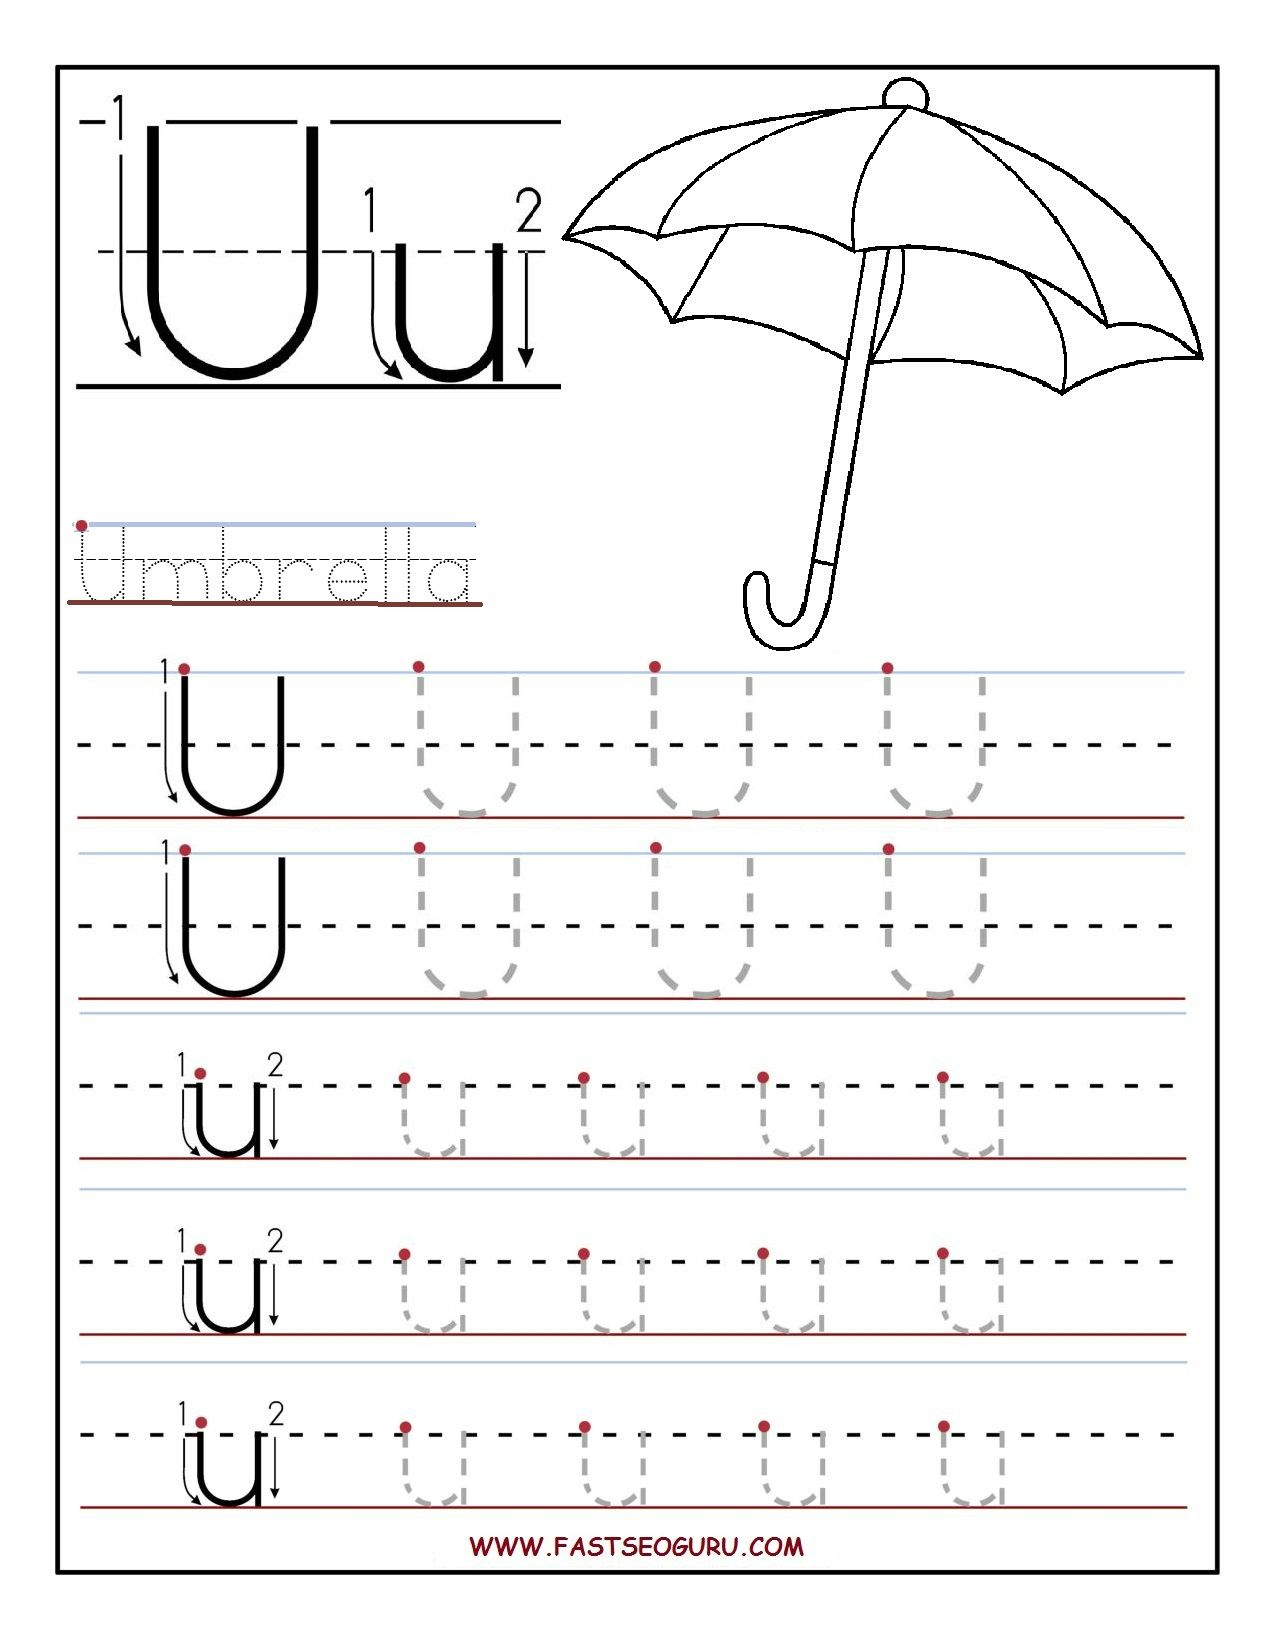 Printable Letter U Tracing Worksheets For Preschool for Letter U Tracing And Writing